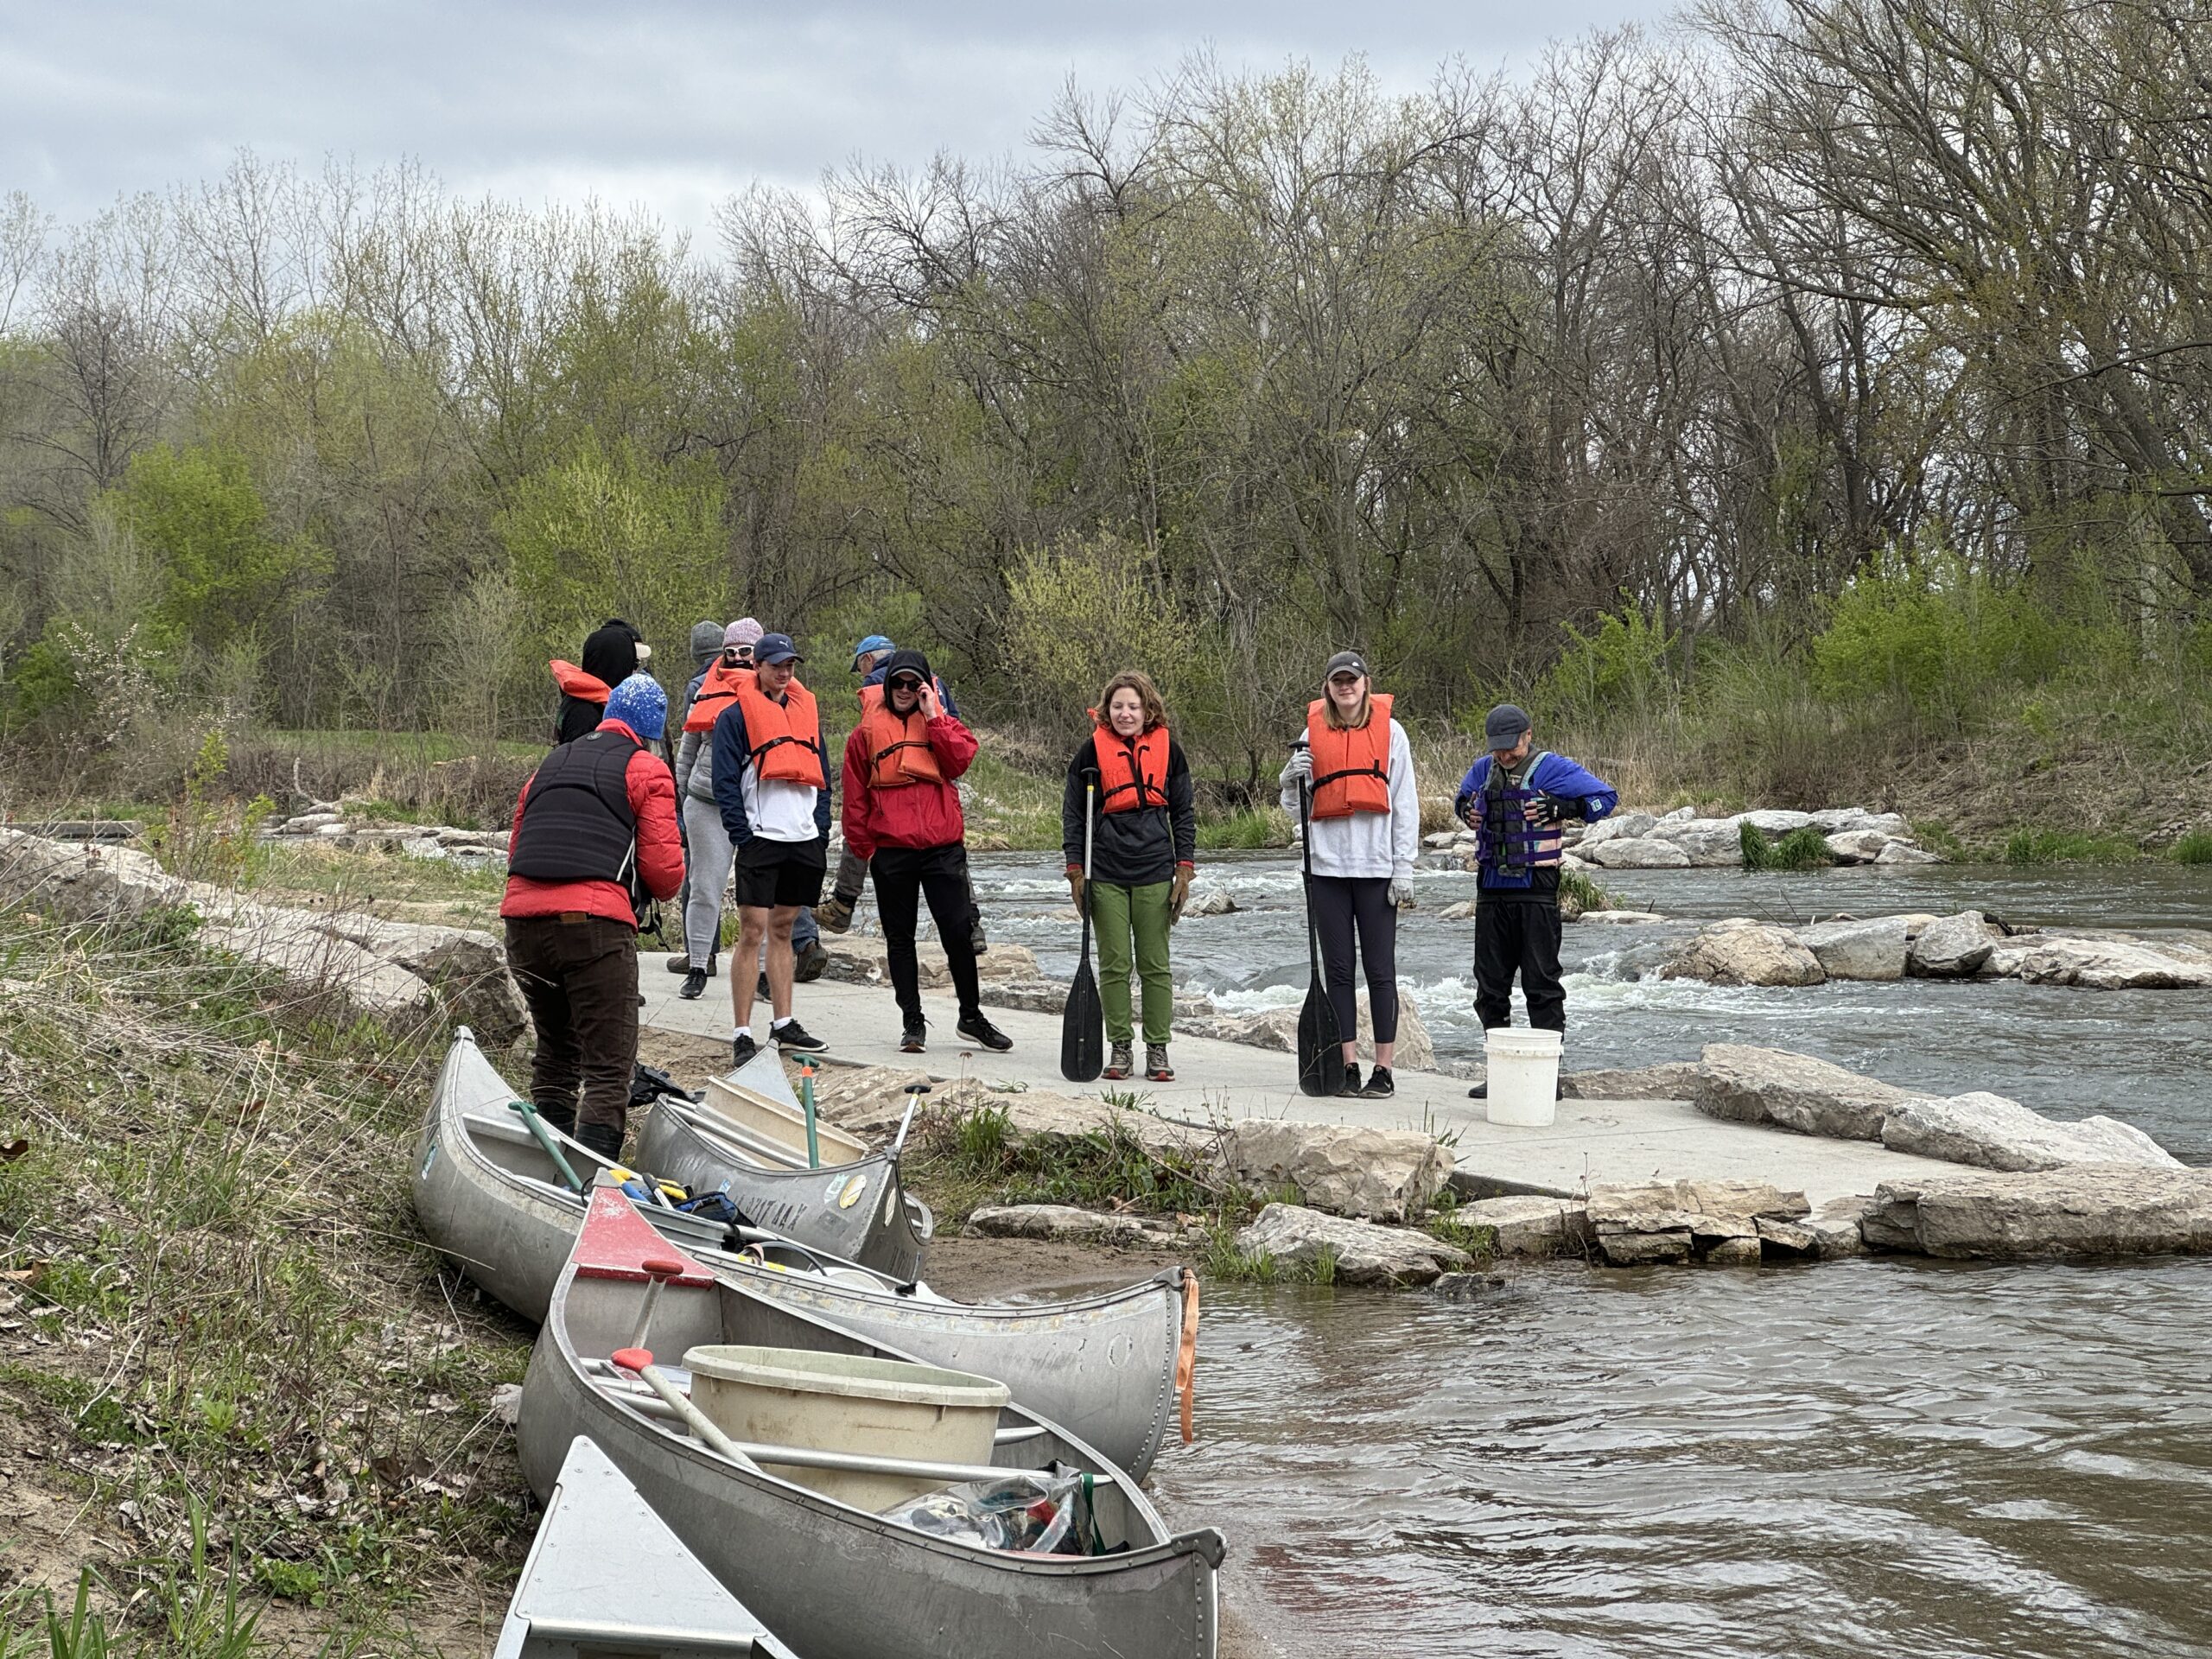 Volunteers launched canoes at N. River Valley Park in Ames (credit: Liz Calhoun)